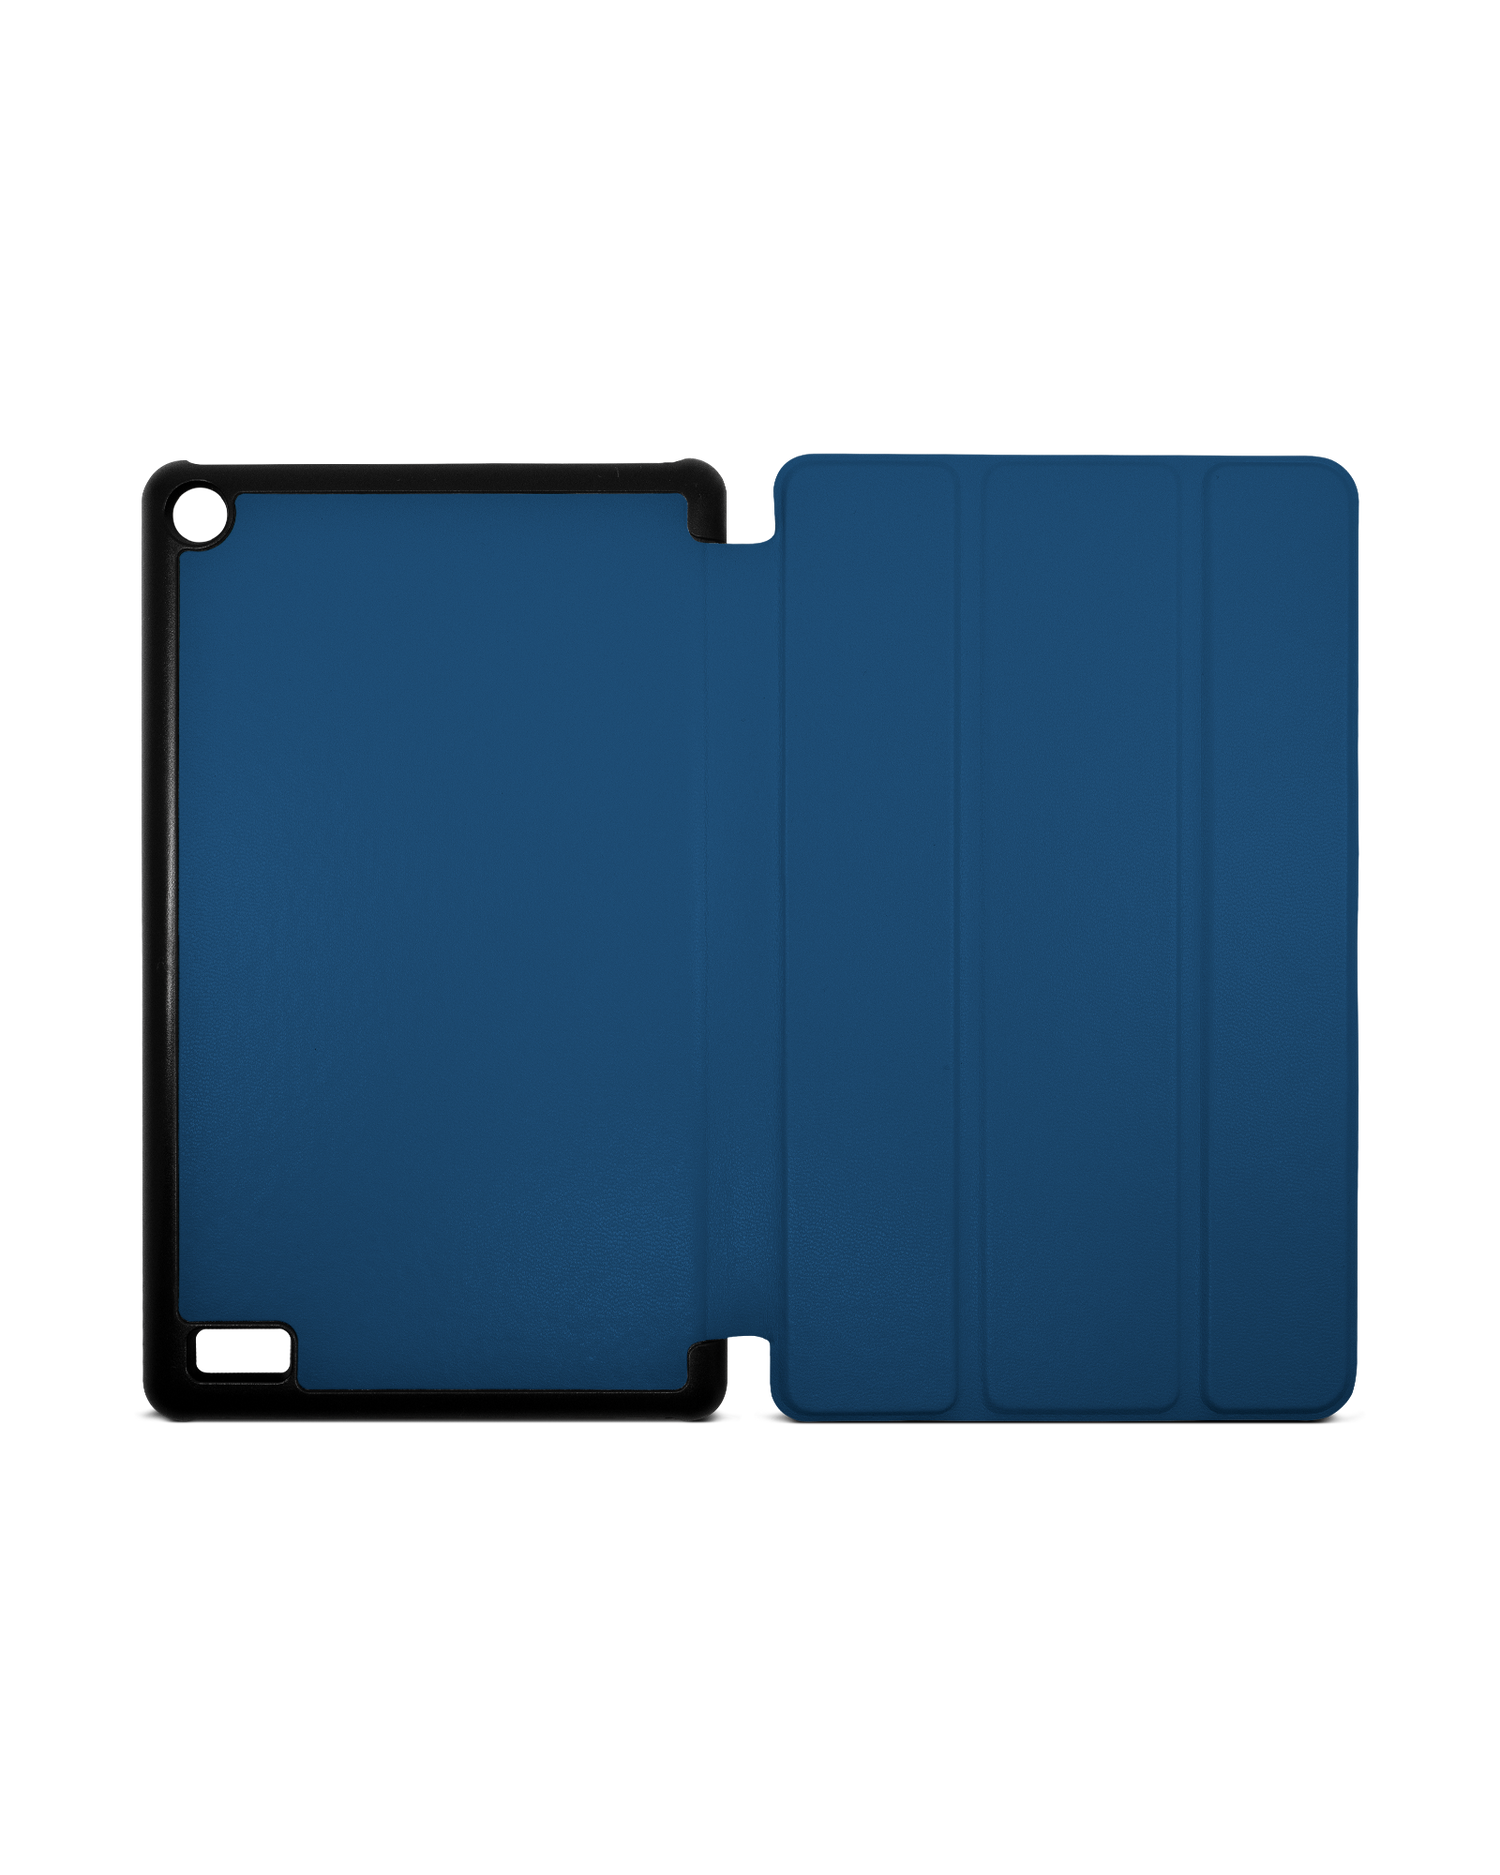 CLASSIC BLUE Tablet Smart Case for Amazon Fire 7: Opened